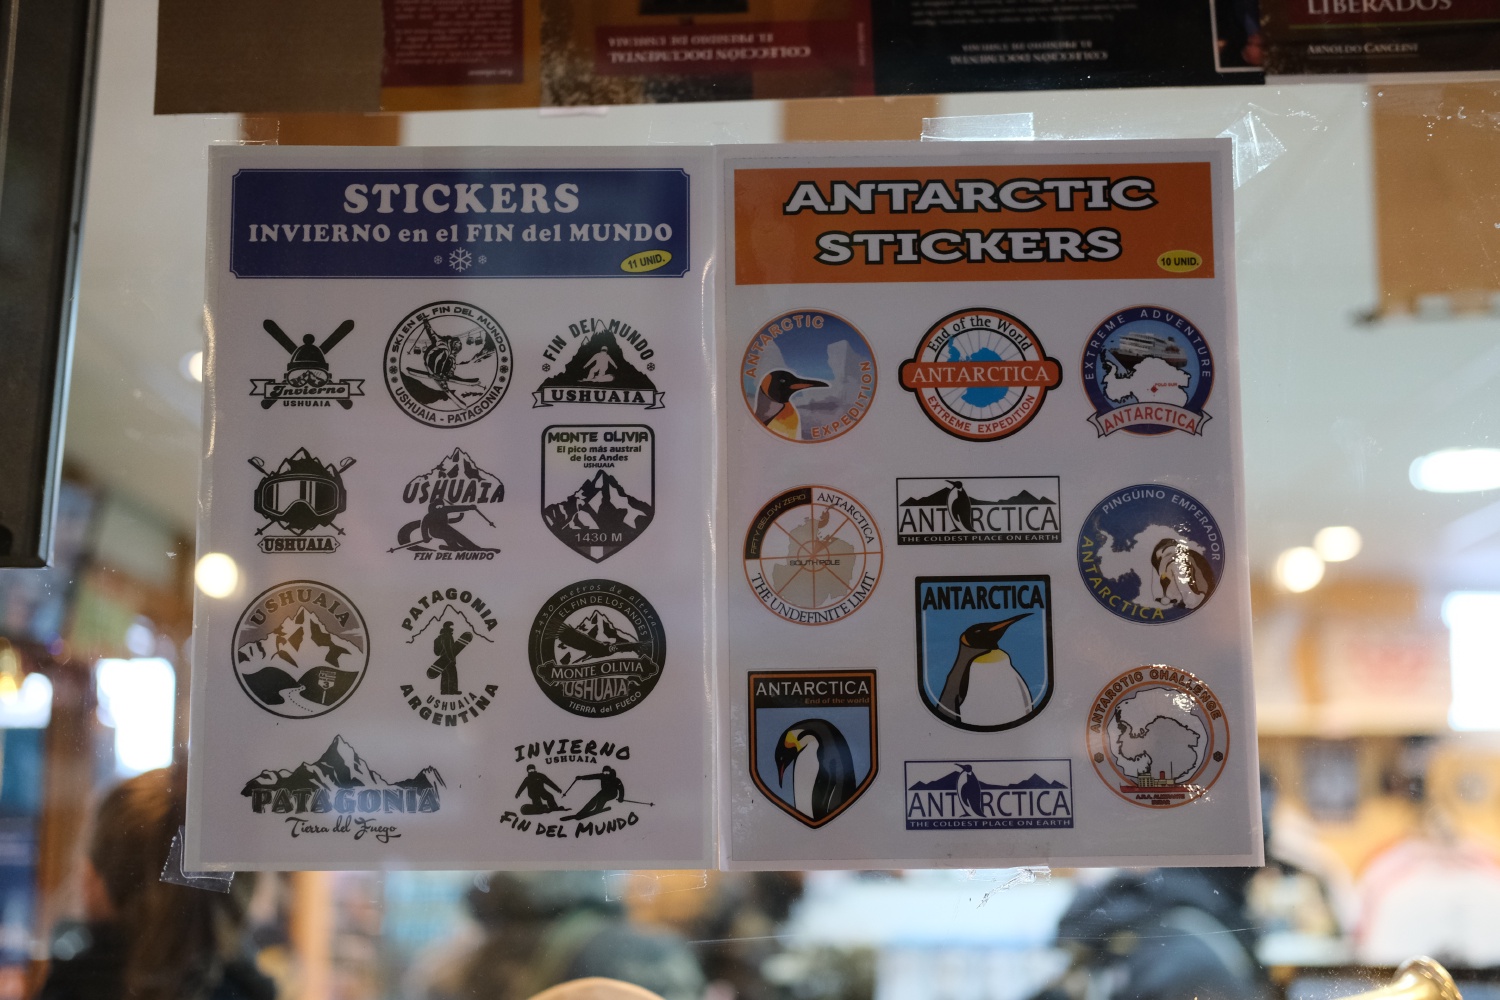 Hmm since we can't really buy things from our travels (uhh we live with just two luggages each), maybe stickers would be a compromise?